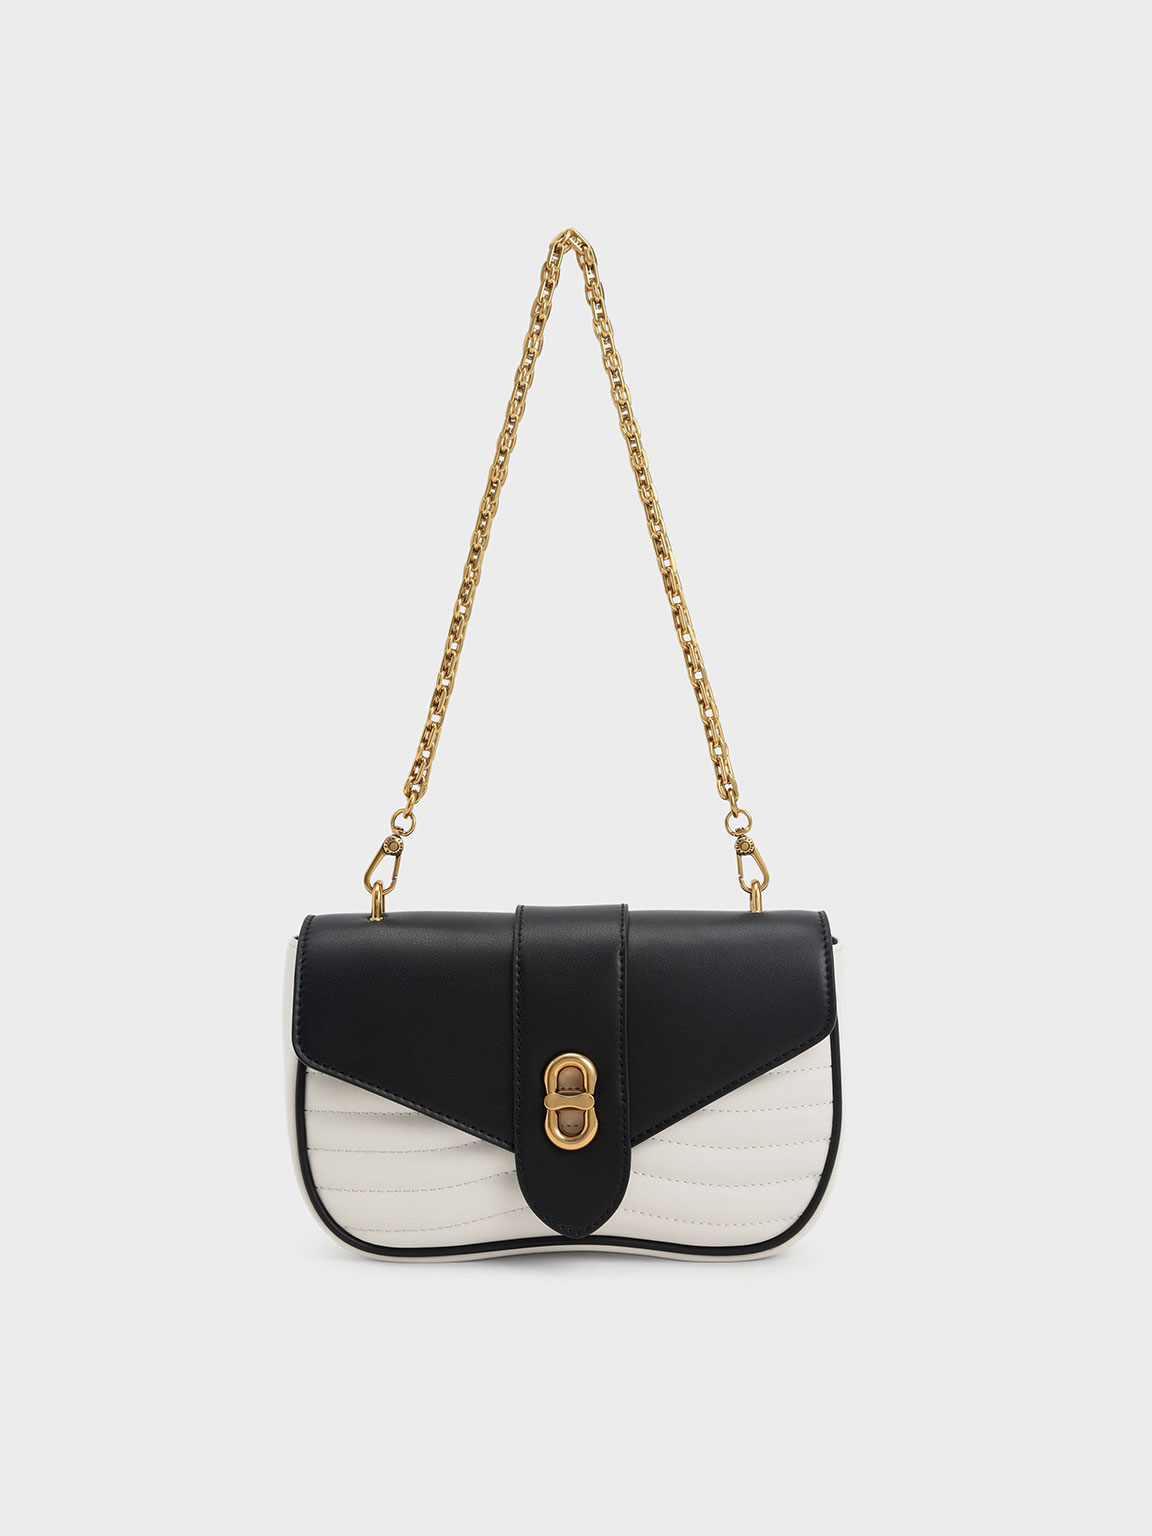 Charles & Keith Women's Aubrielle Top Handle Bag